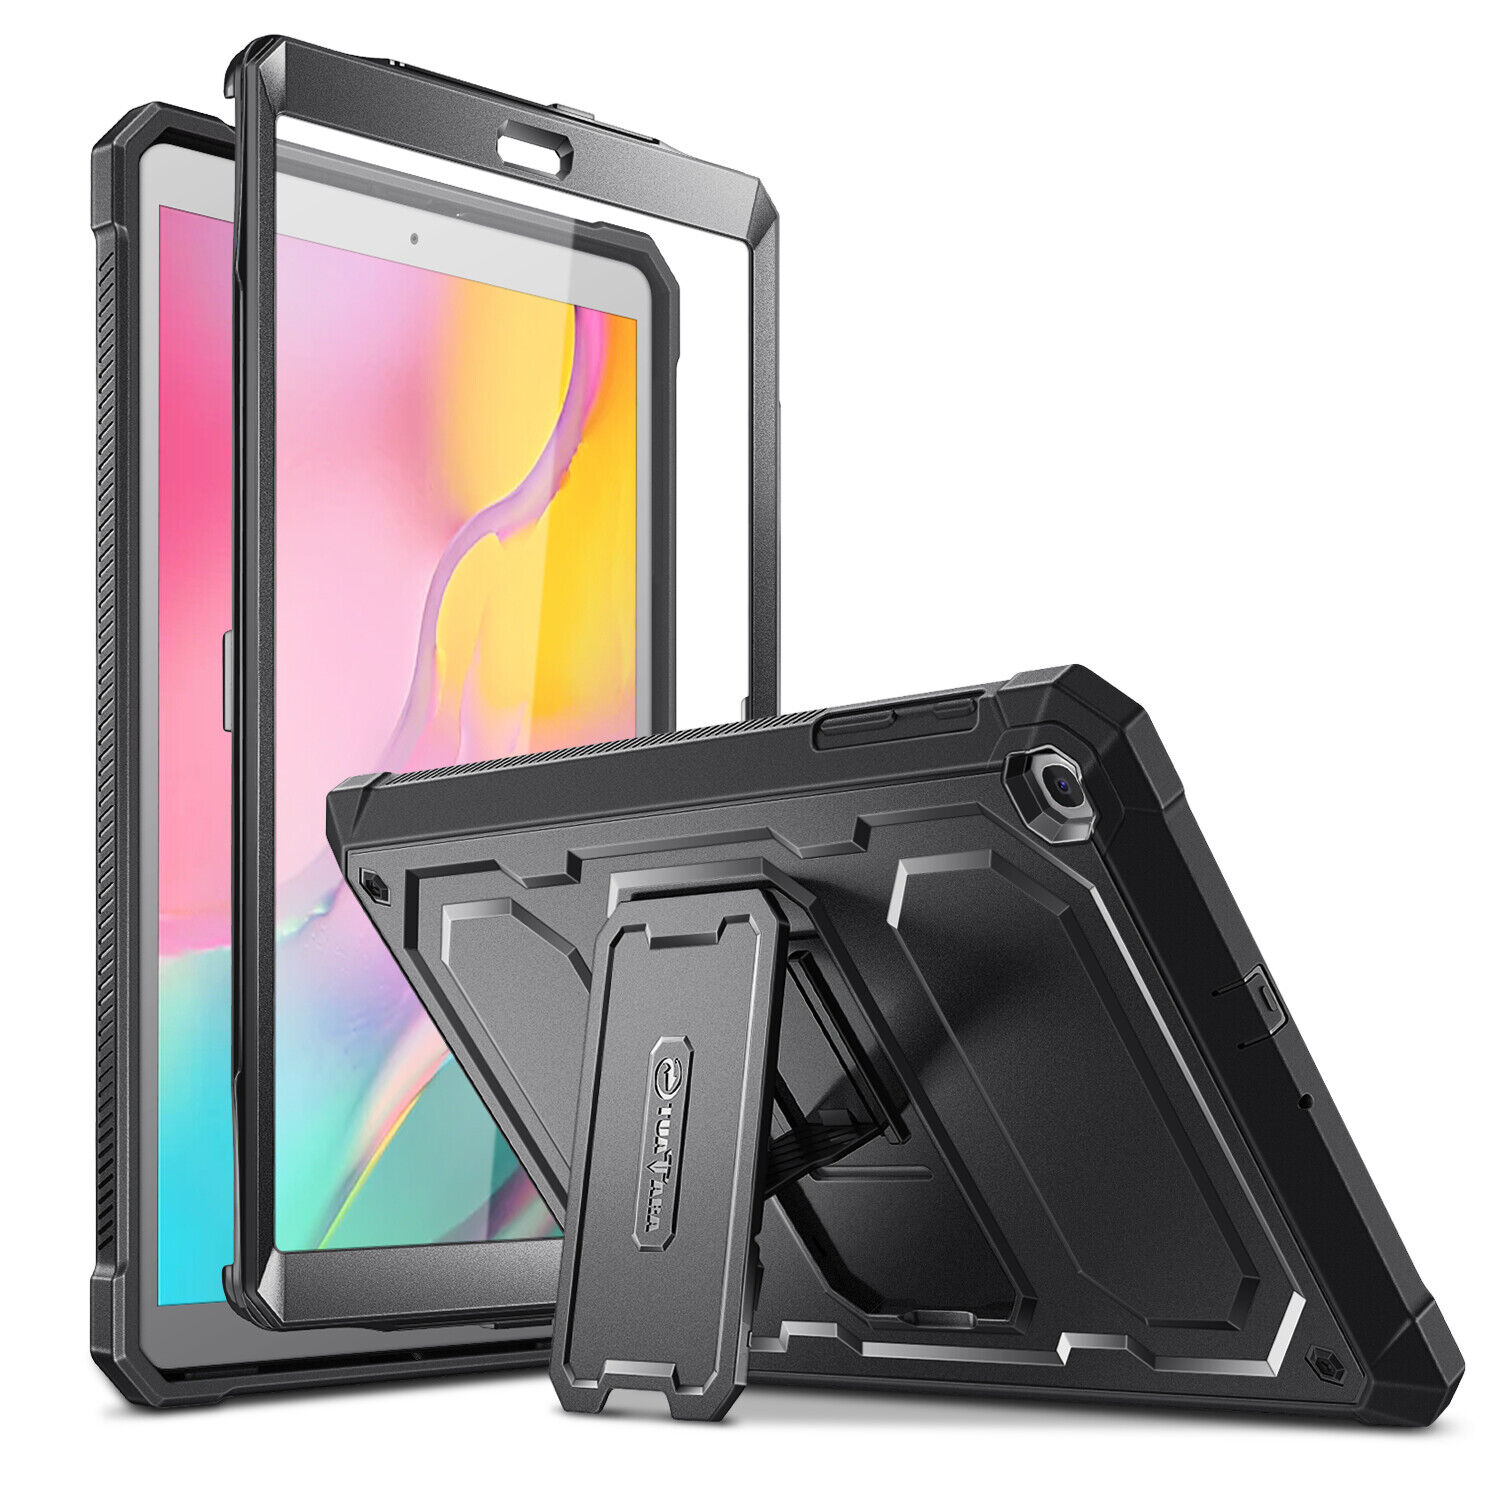 Shockproof Case For Samsung Galaxy Tab A 10.1 2019 T510 Rugged Kickstand Cover